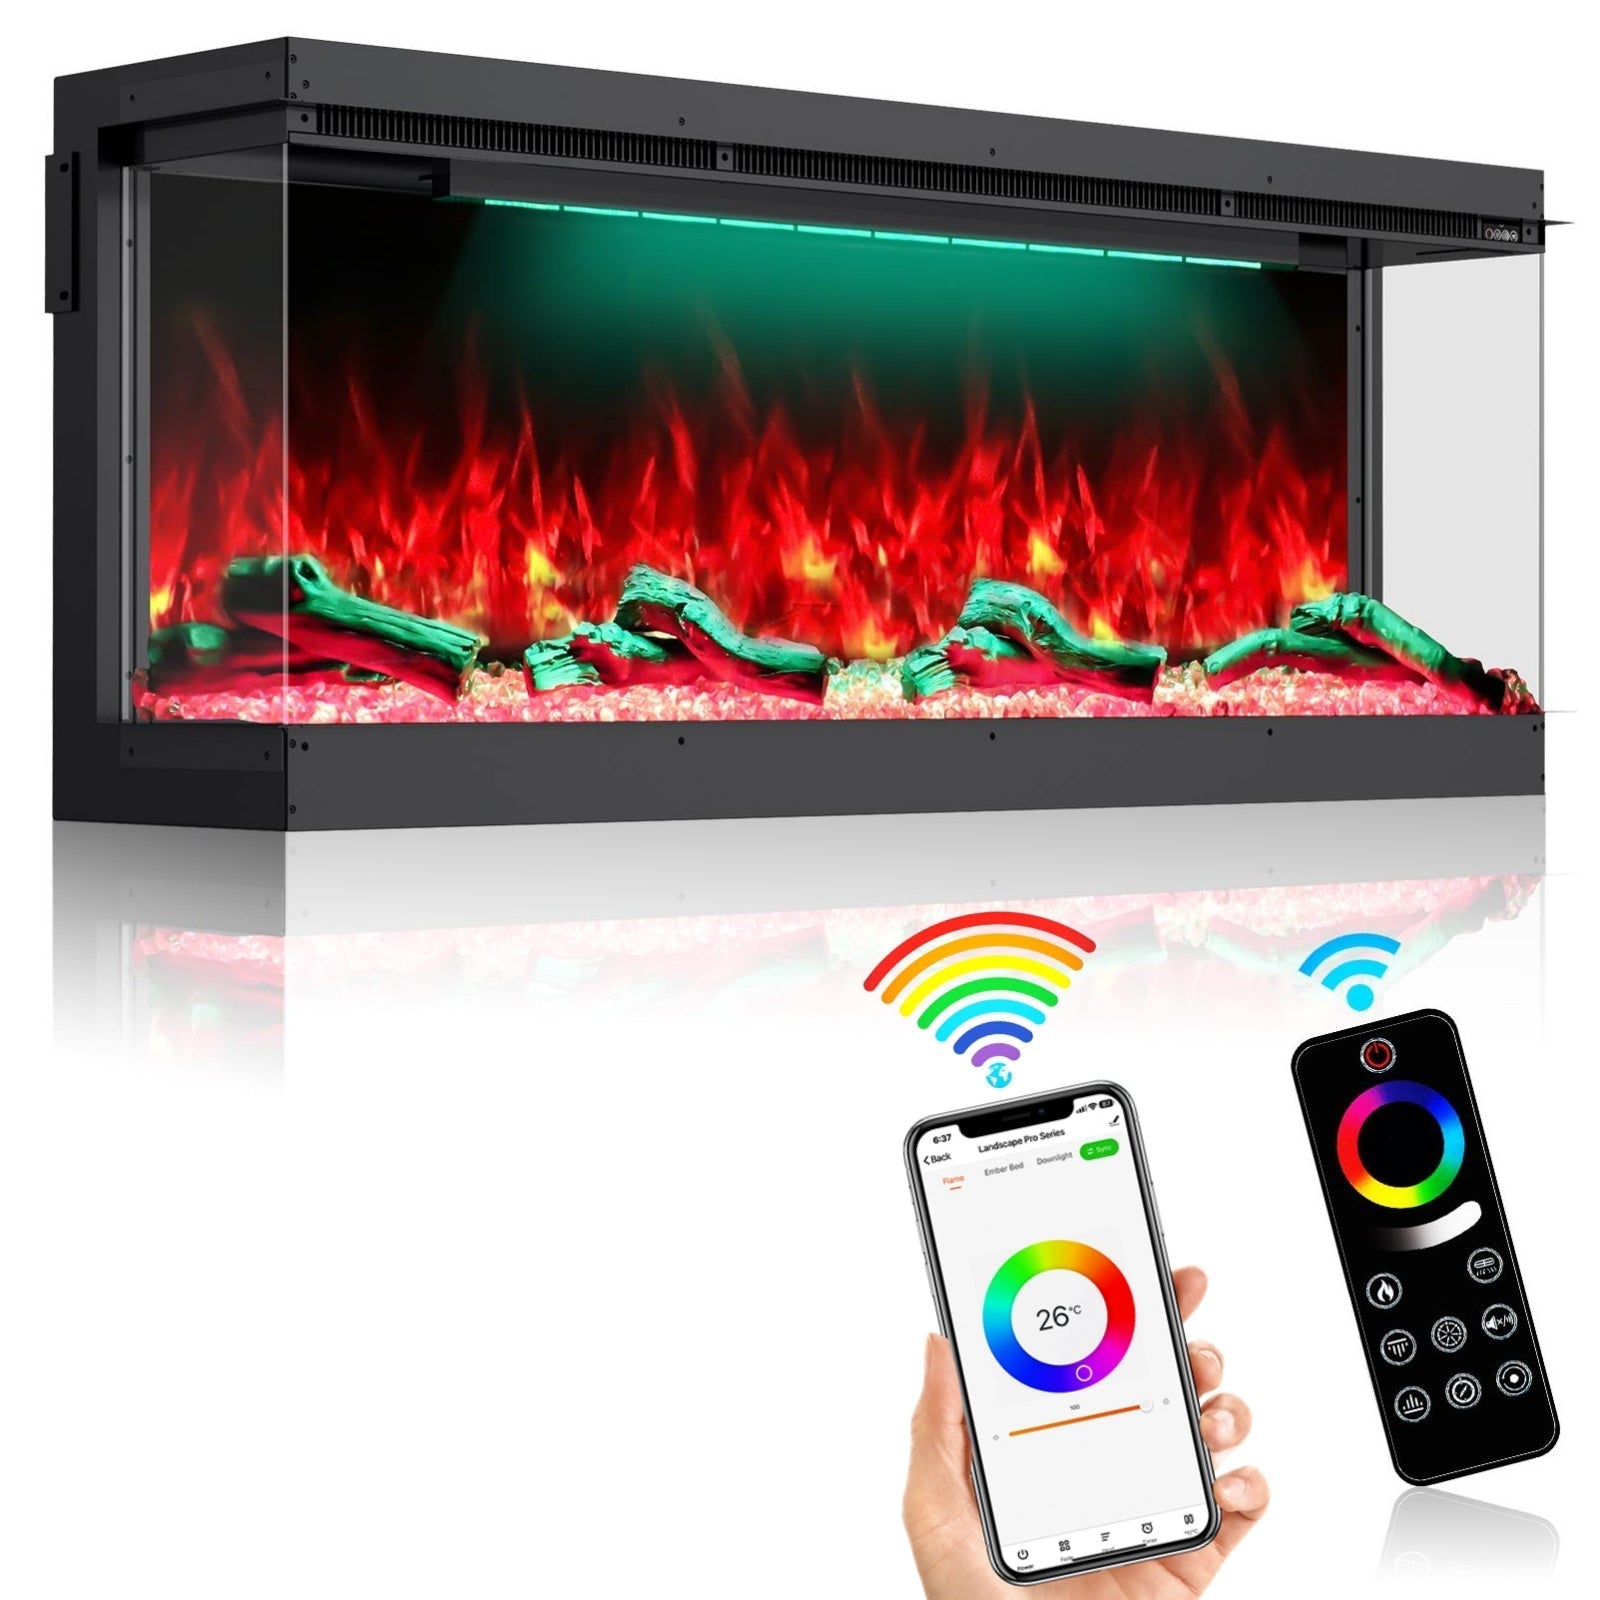 Recessed 3-Sided Electric Fireplace, 60-inch Smart WiFi 251 Flame Colors Combination Inserts Eletric Fire Place Heater for Living Room Indoor Use with Remote Control, Log & Crystals, Black